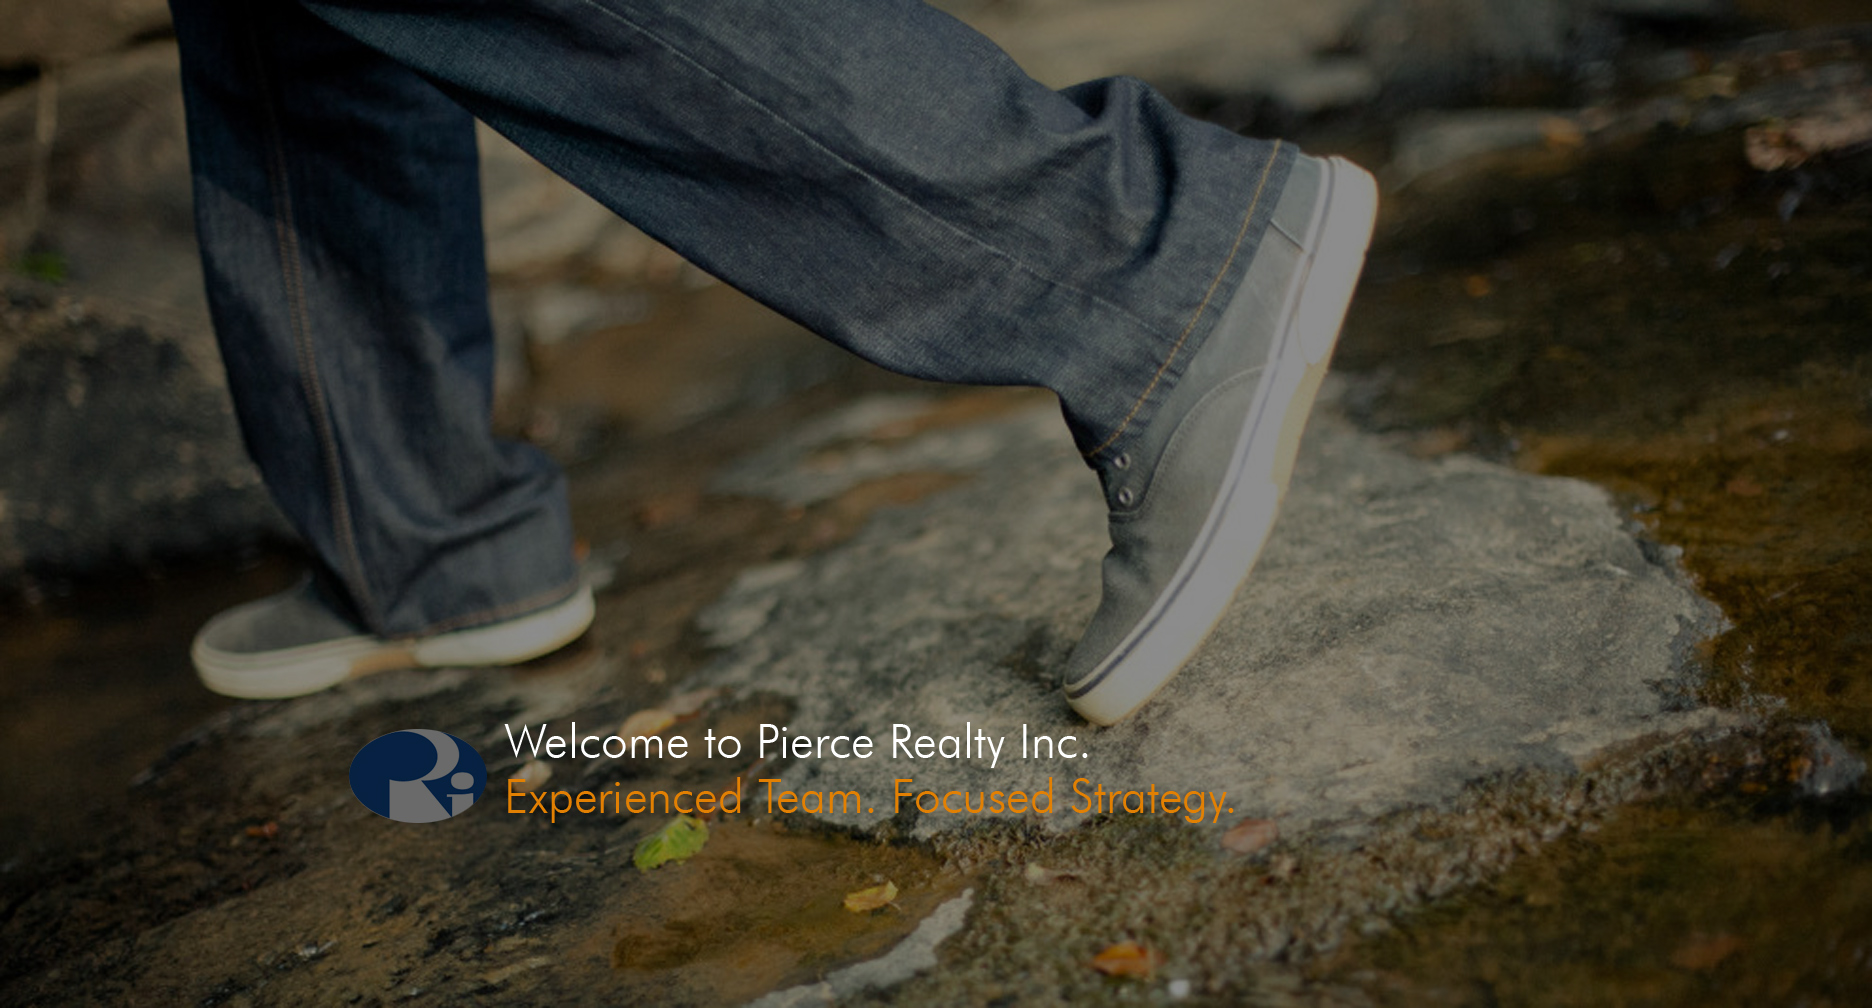 Welcome to Pierce Realty, Inc. Experienced Team. Focused Strategy.